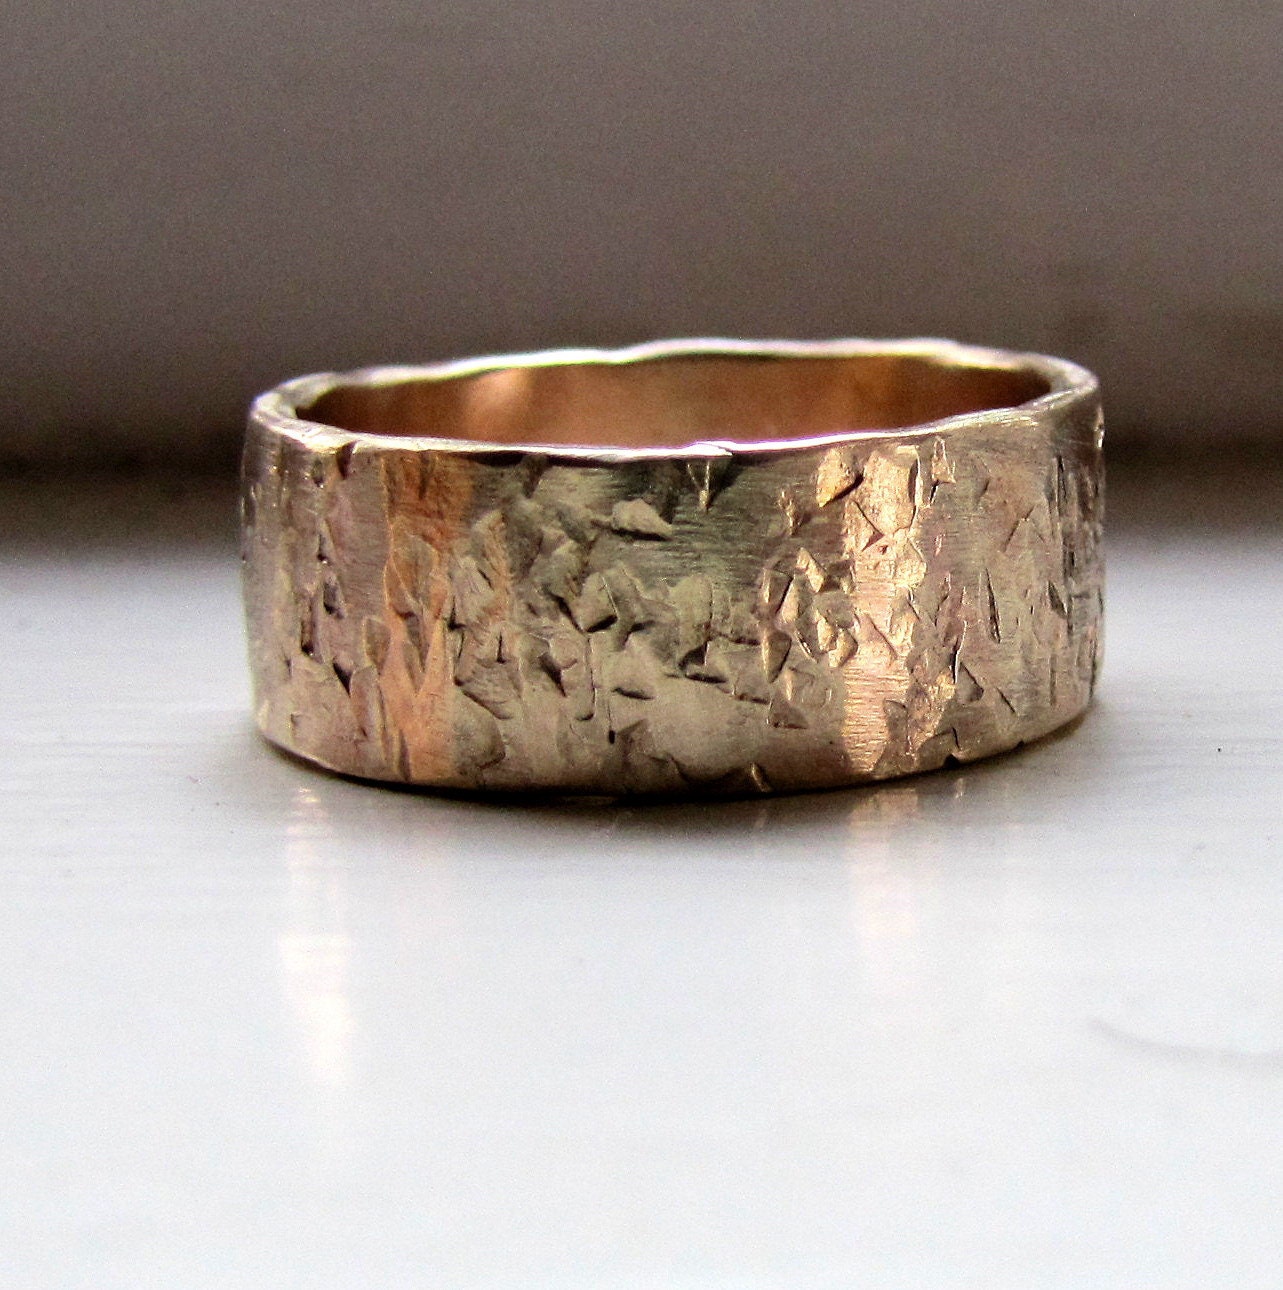 Men's Wedding Band - 14k Gold Unique Rustic Distressed Ring. This ...